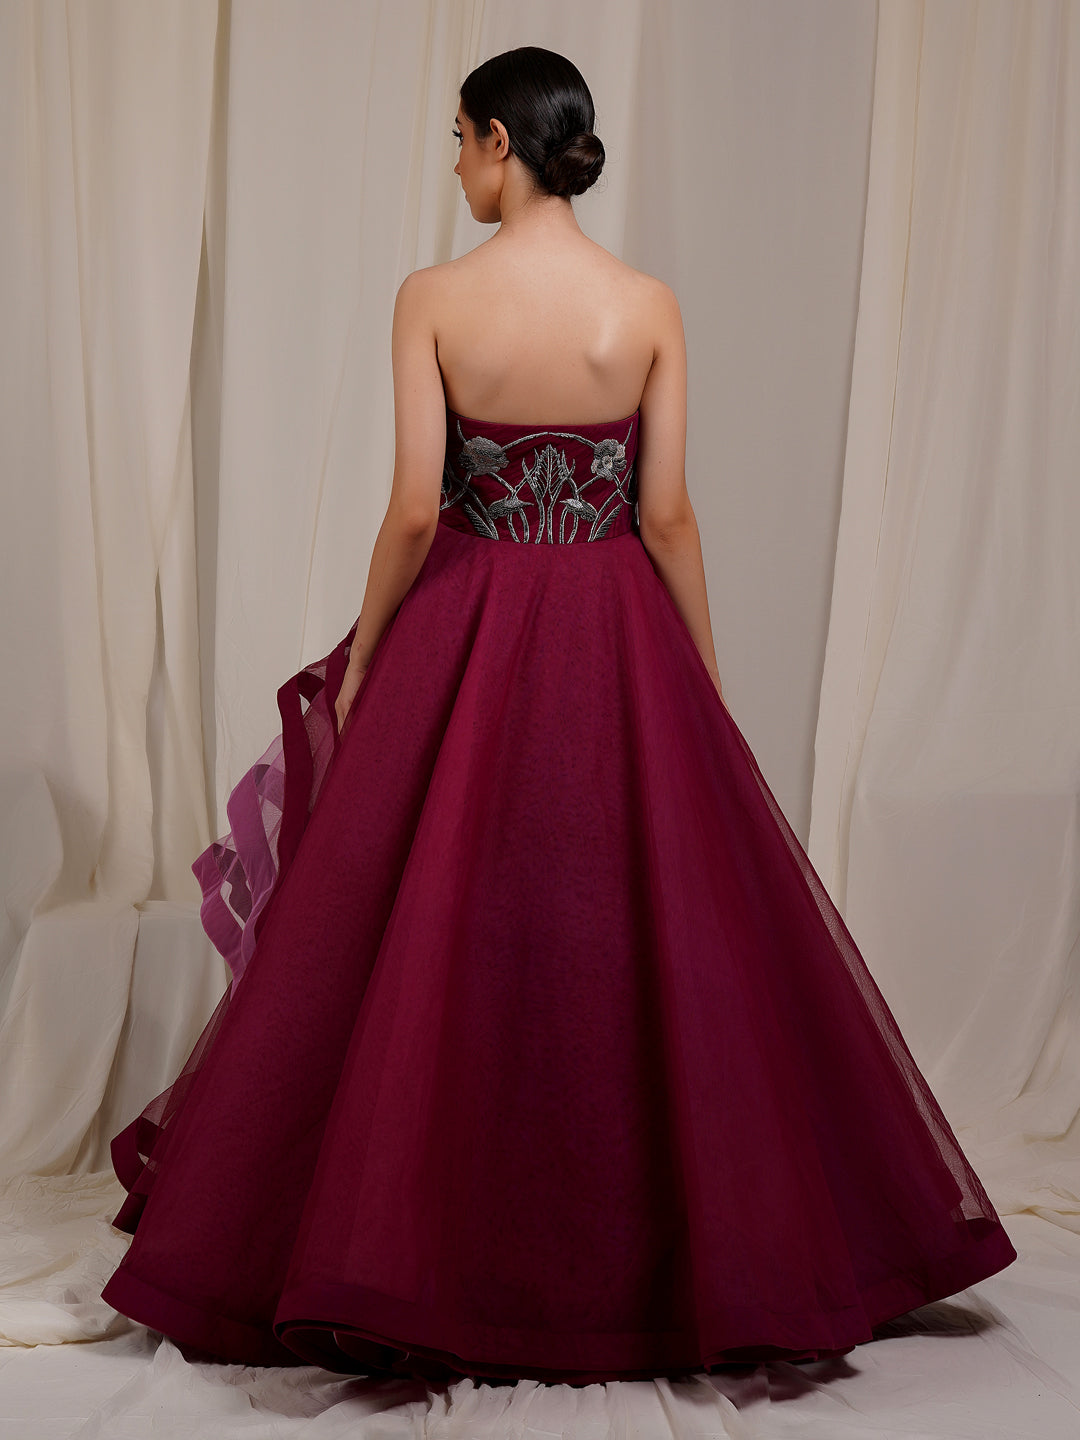 Featured Here Is A move Princess Cotton Silk And Net Gown